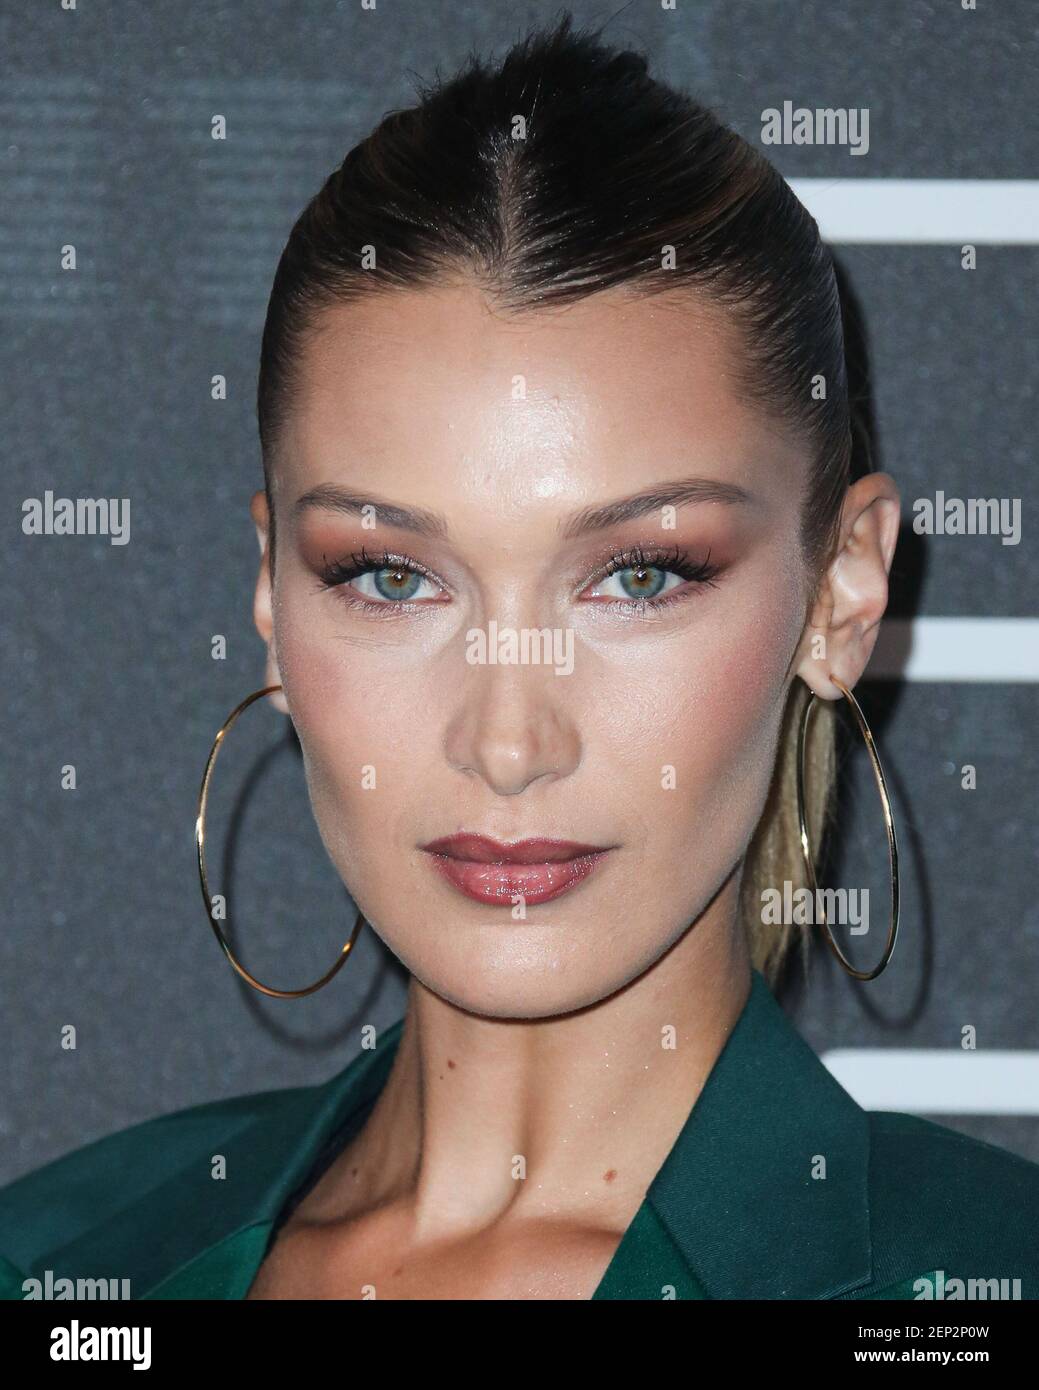 File Bella Hadid Is The World S Most Beautiful Woman According To Science Bella Hadid Is The